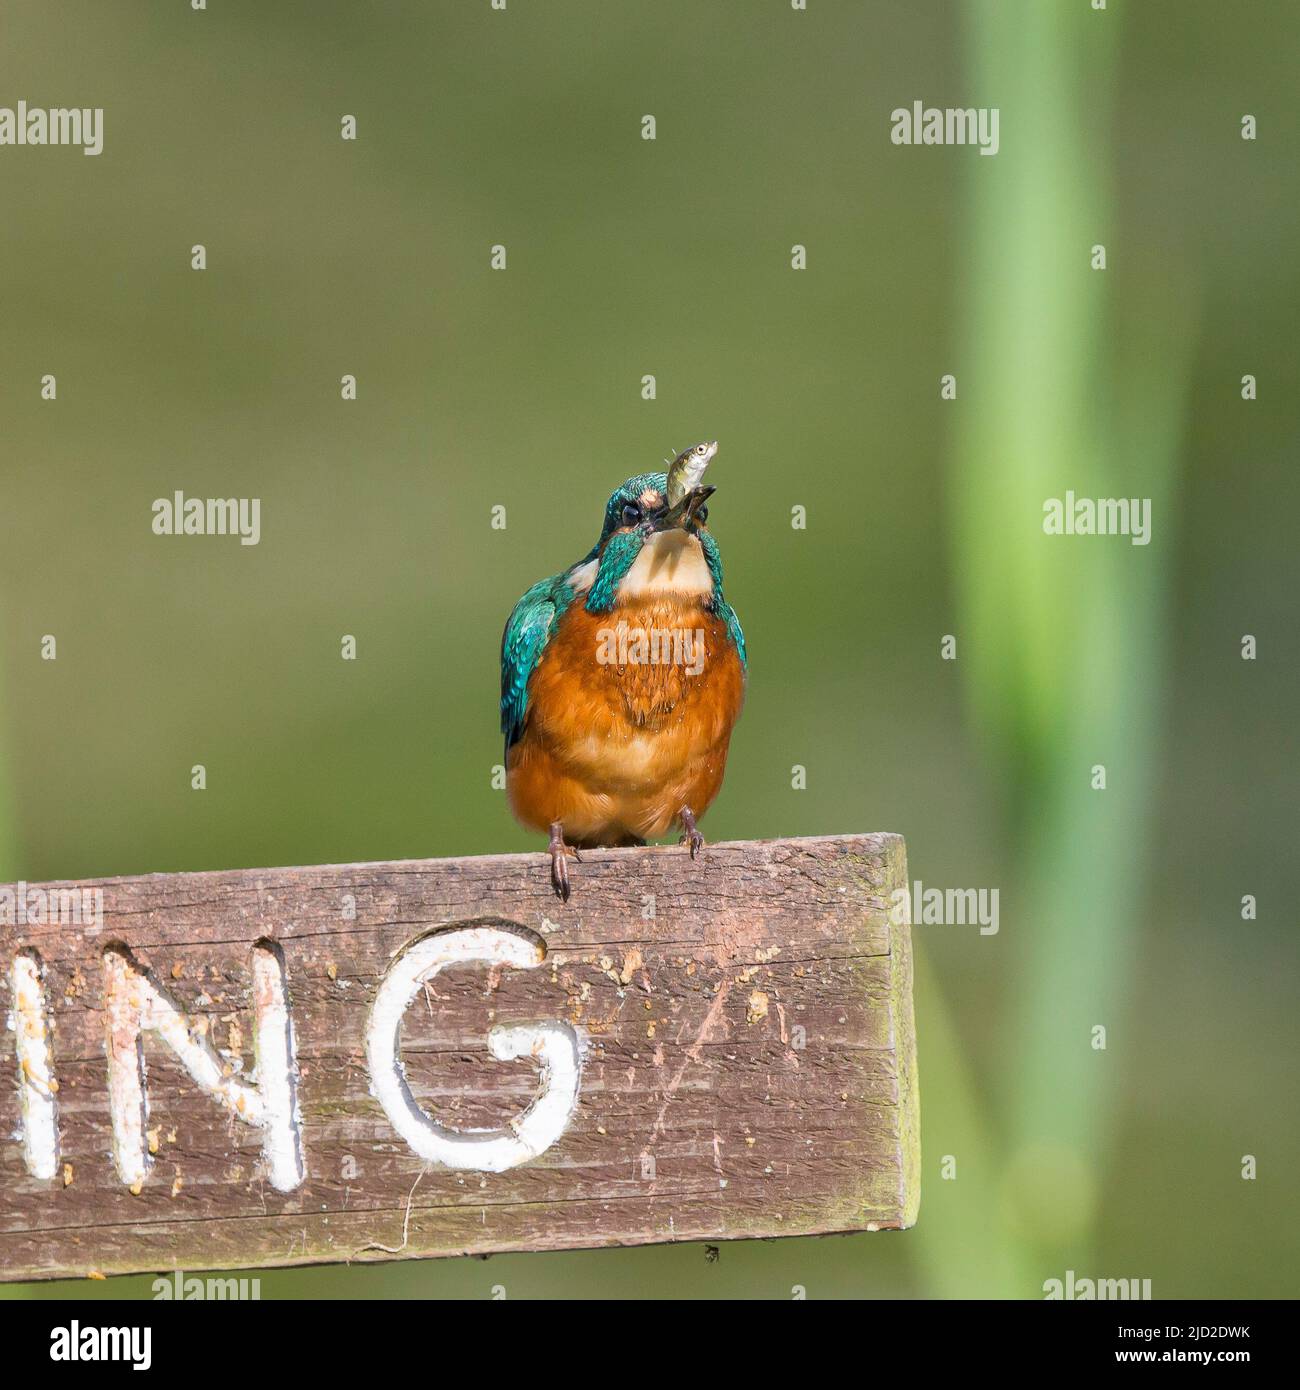 Arley, UK. 17th June, 2022. UK weather: very warm temperatures and bright skies offer the perfect time for a little fishing. A busy kingfisher bird perches on a 'No Fishing' sign eating the freshly caught fish in its beak. Credit: Lee Hudson/Alamy Live News Stock Photo